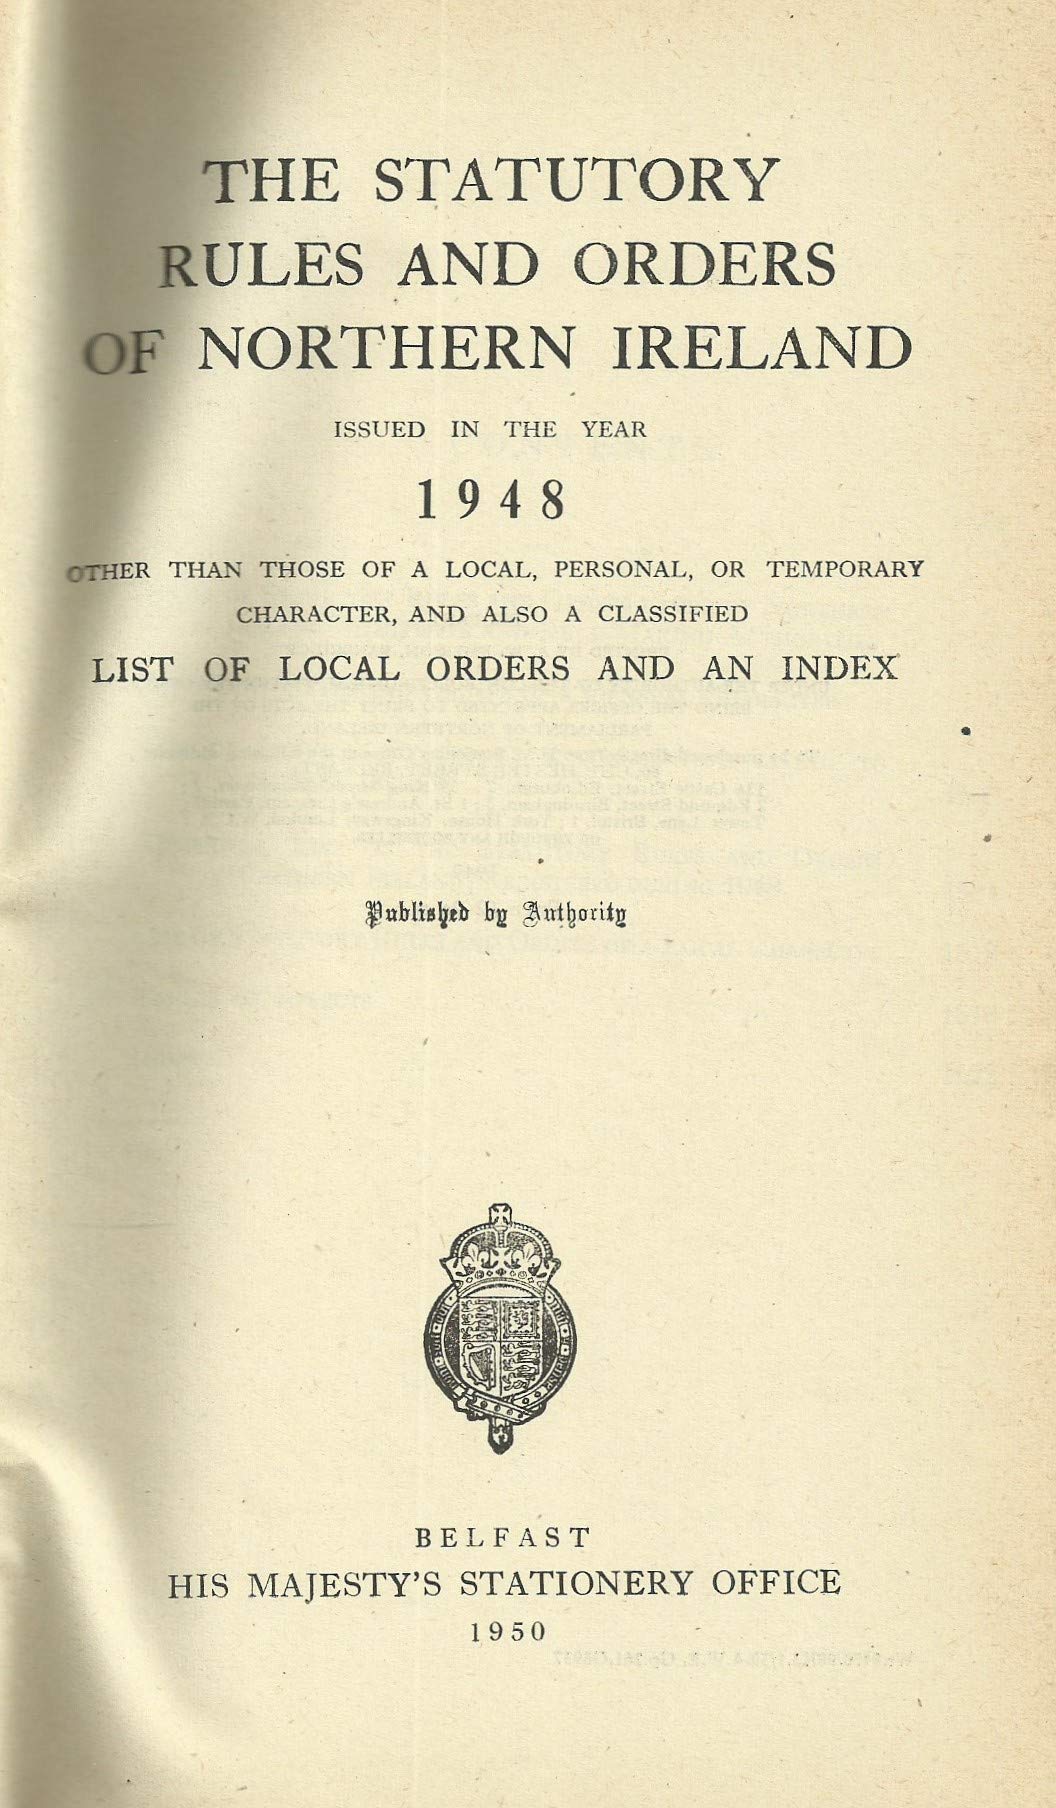 Northern Ireland Statutory Rules and Orders, 1948 - The Statutory Rules and Orders of Northern Ireland